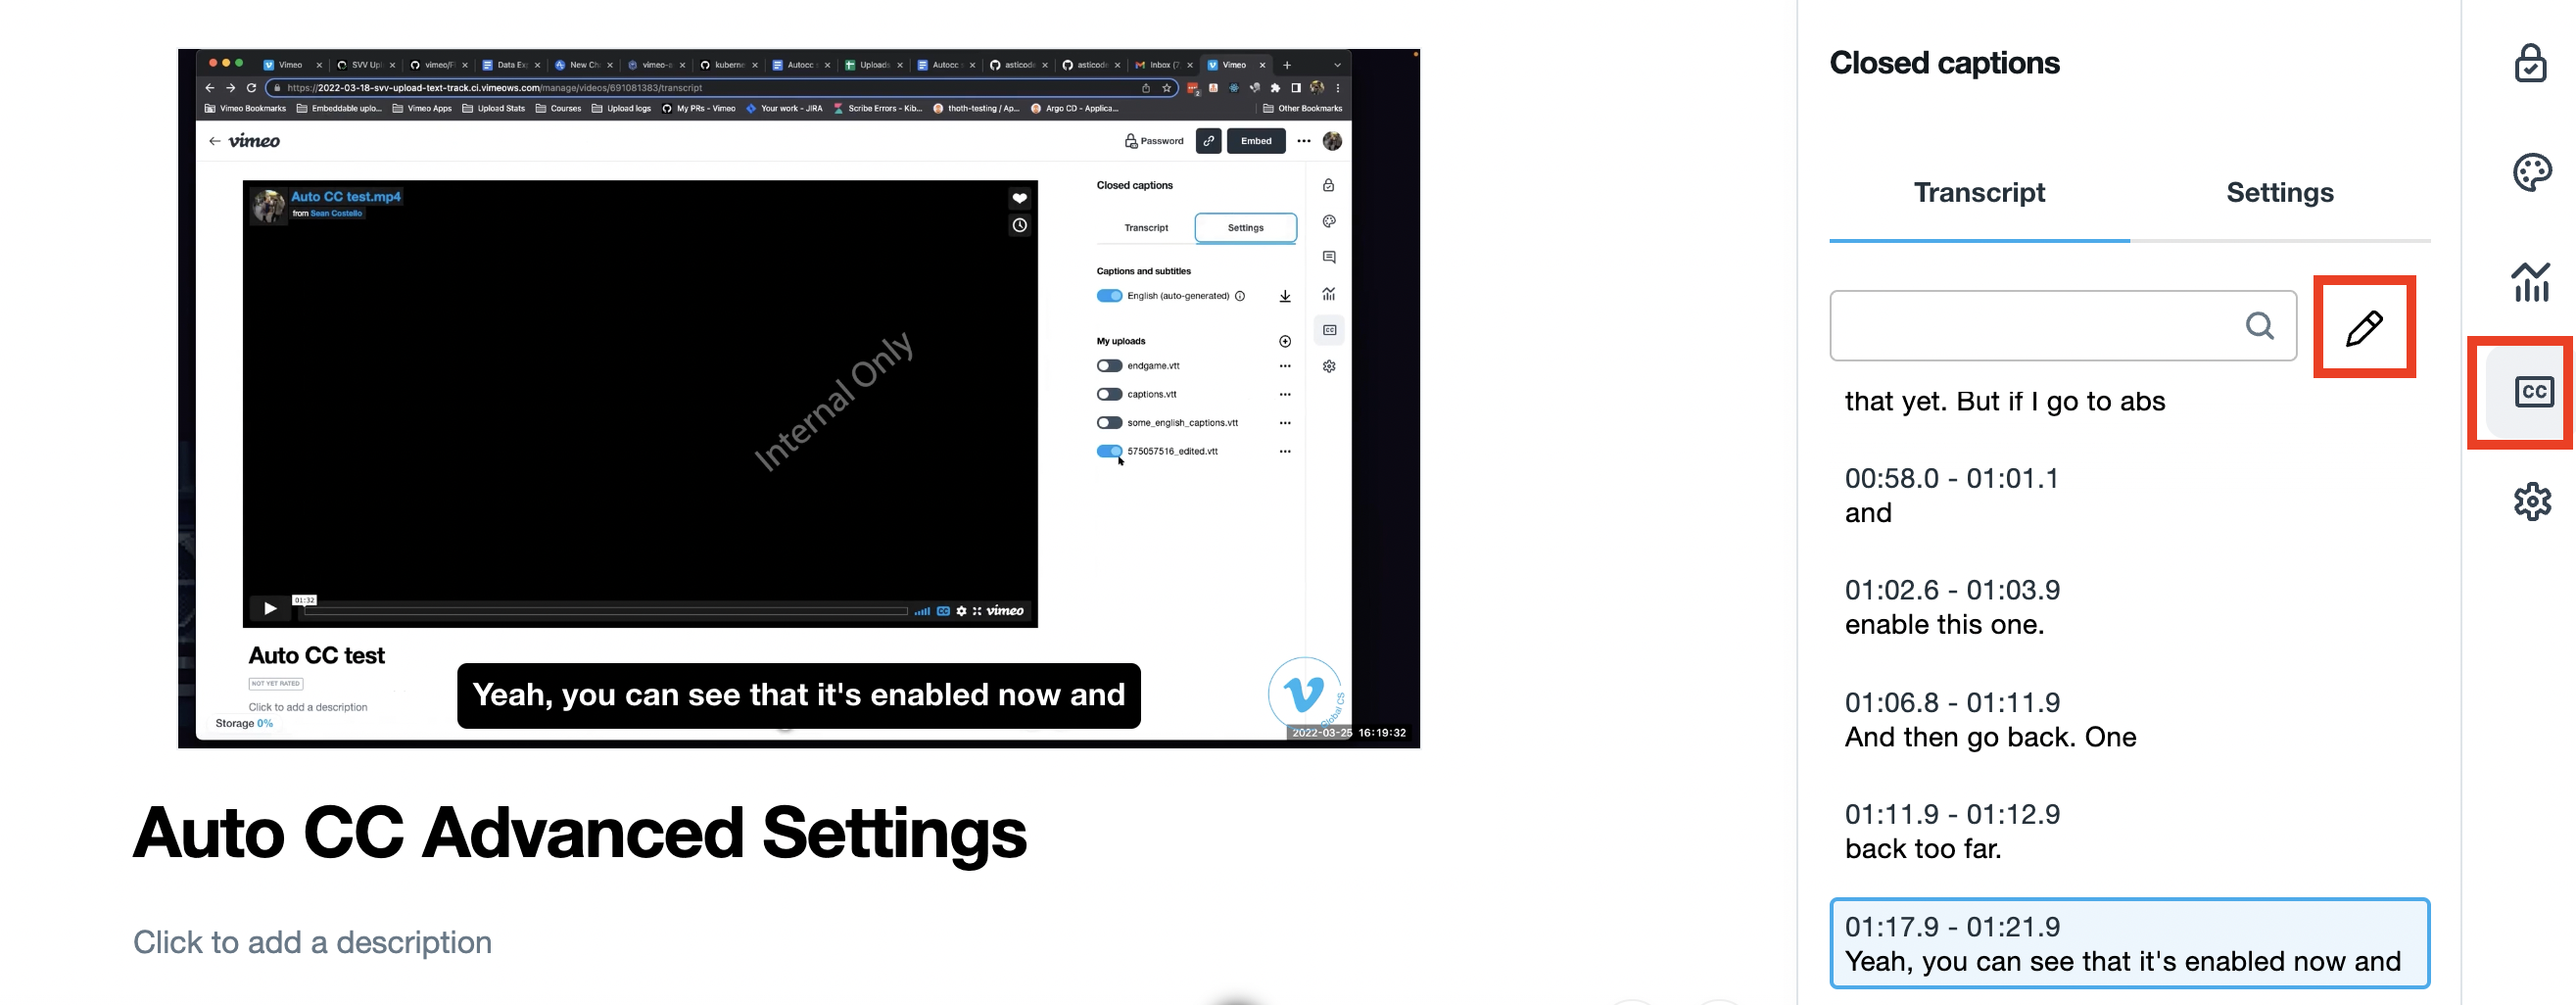 A screenshot showing the video settings page. Selecting the 'CC' button on the right of the screen will open the 'Closed captions' menu. The pencil icon to the right of the 'Closed captions' menu will open the transcript editor.